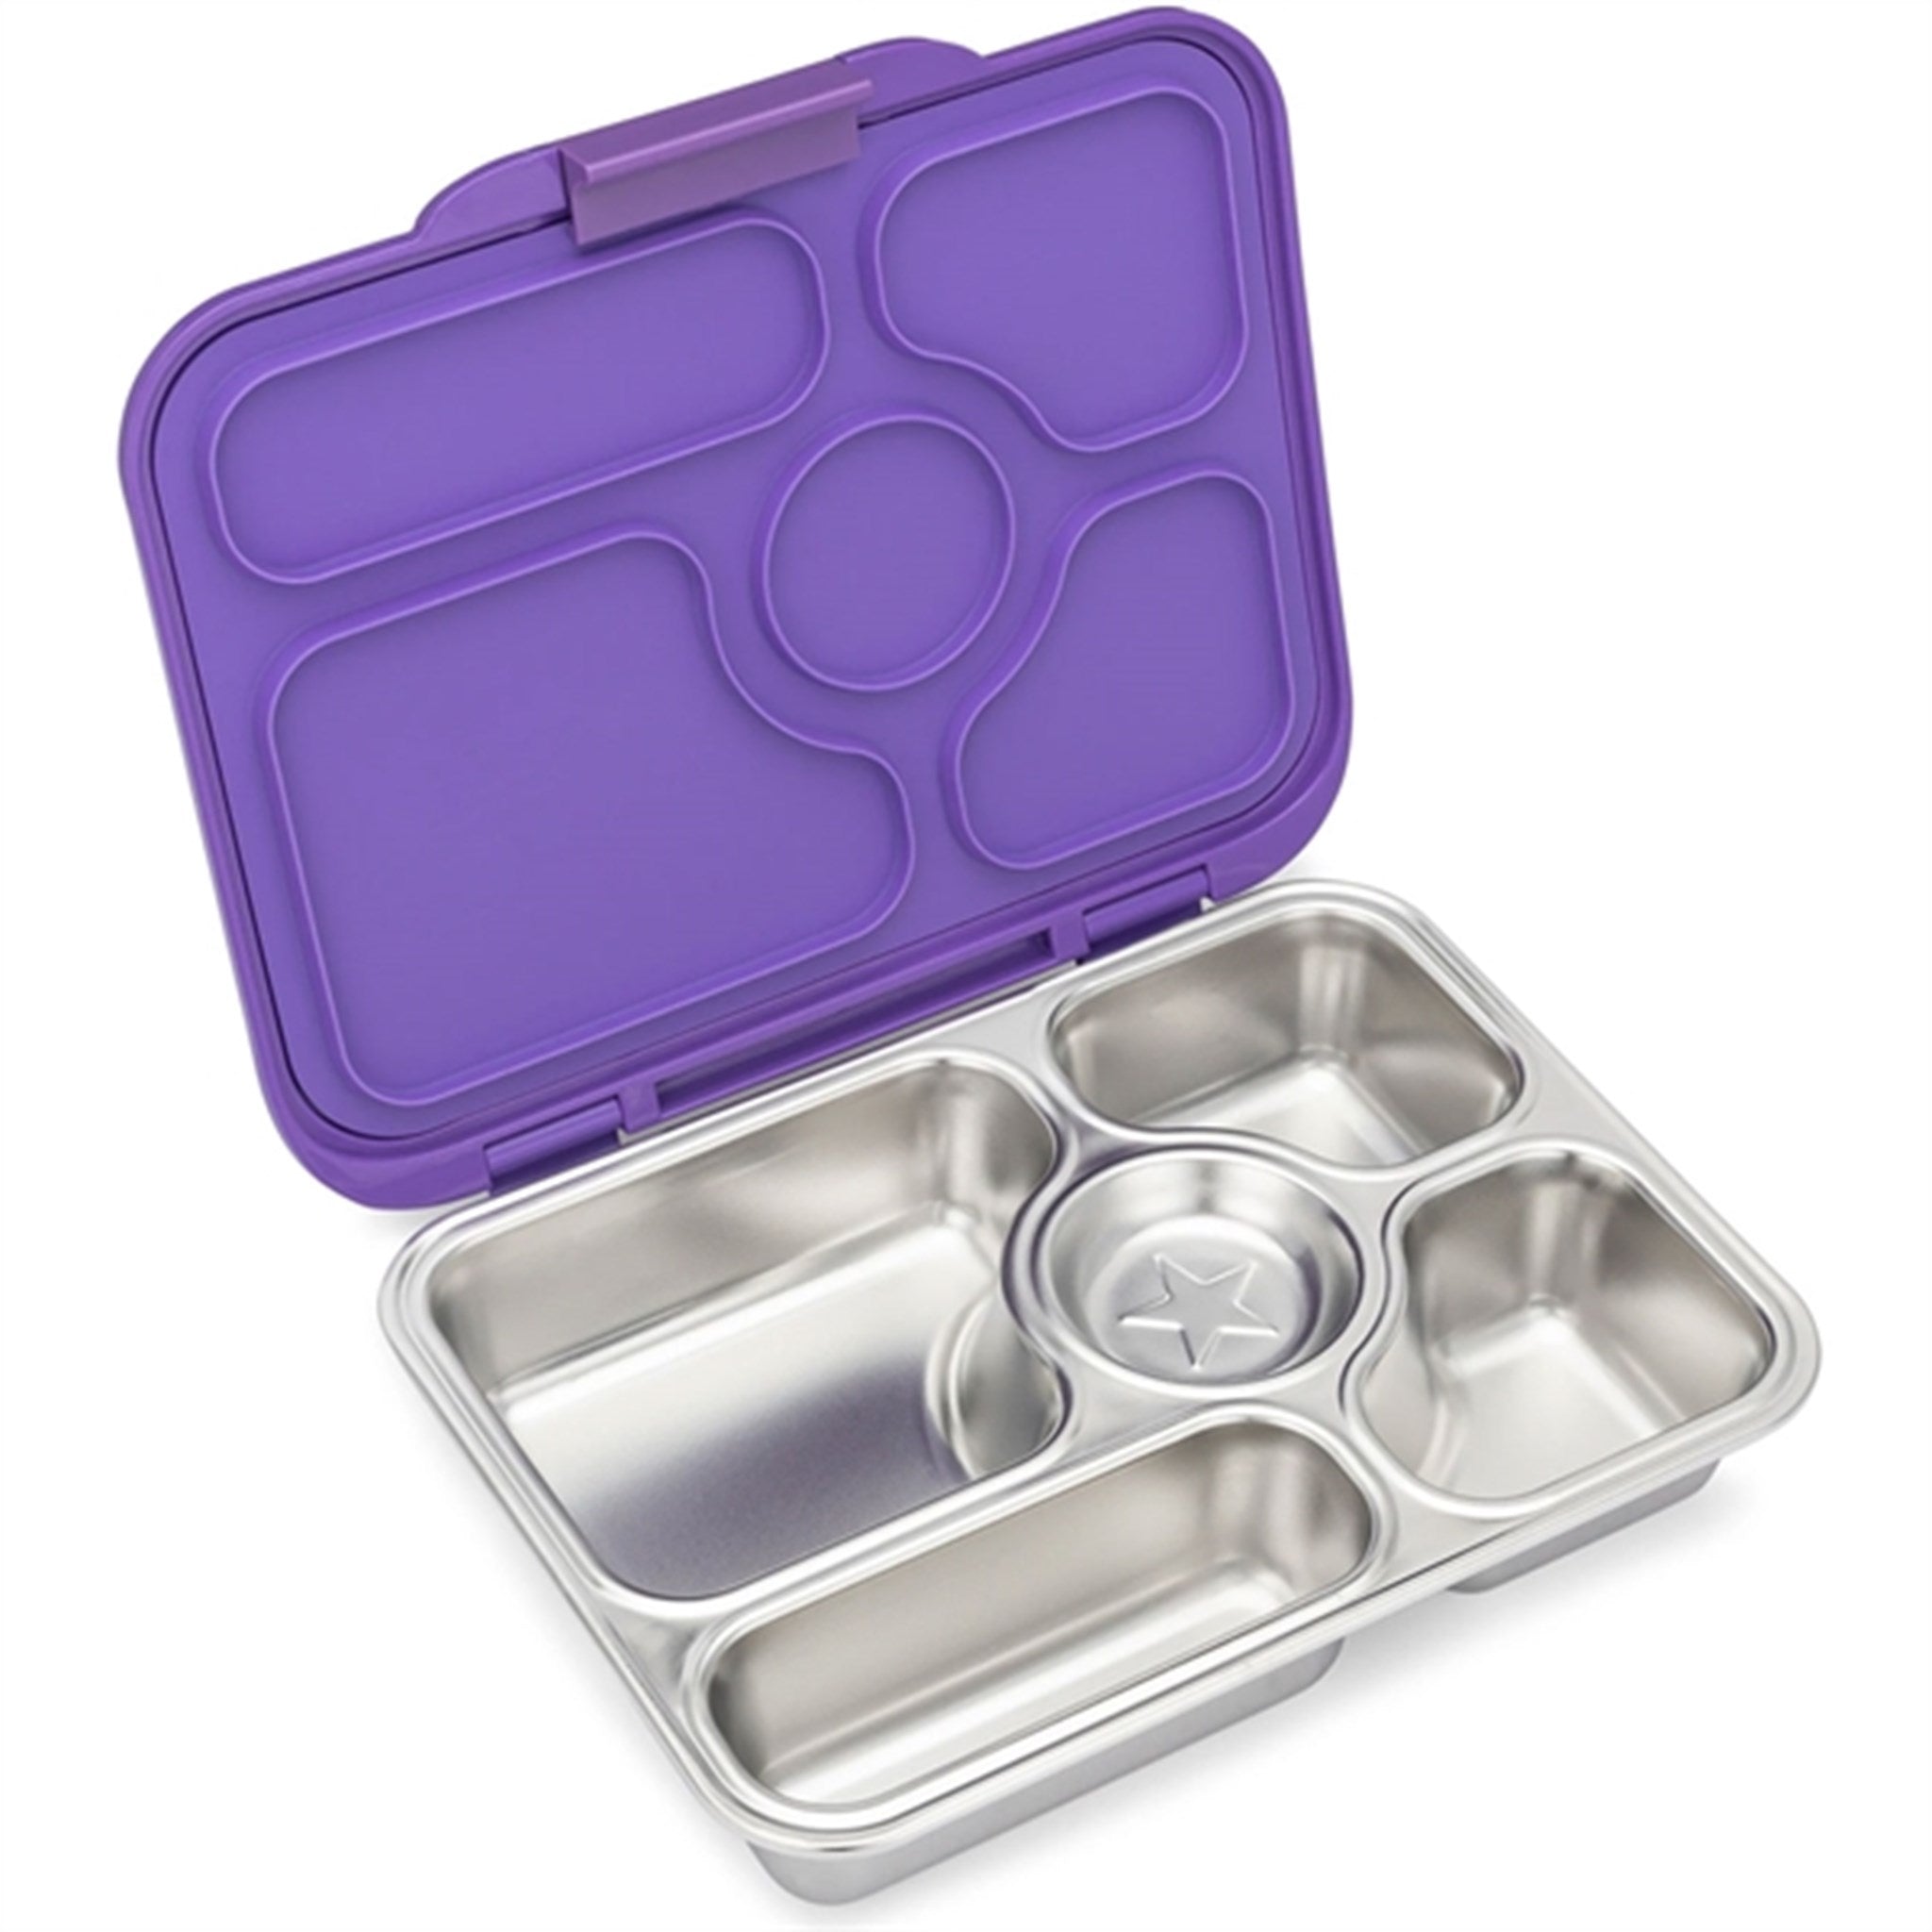 Yumbox Presto Stainless Steel Lunch Box Remy Lavender